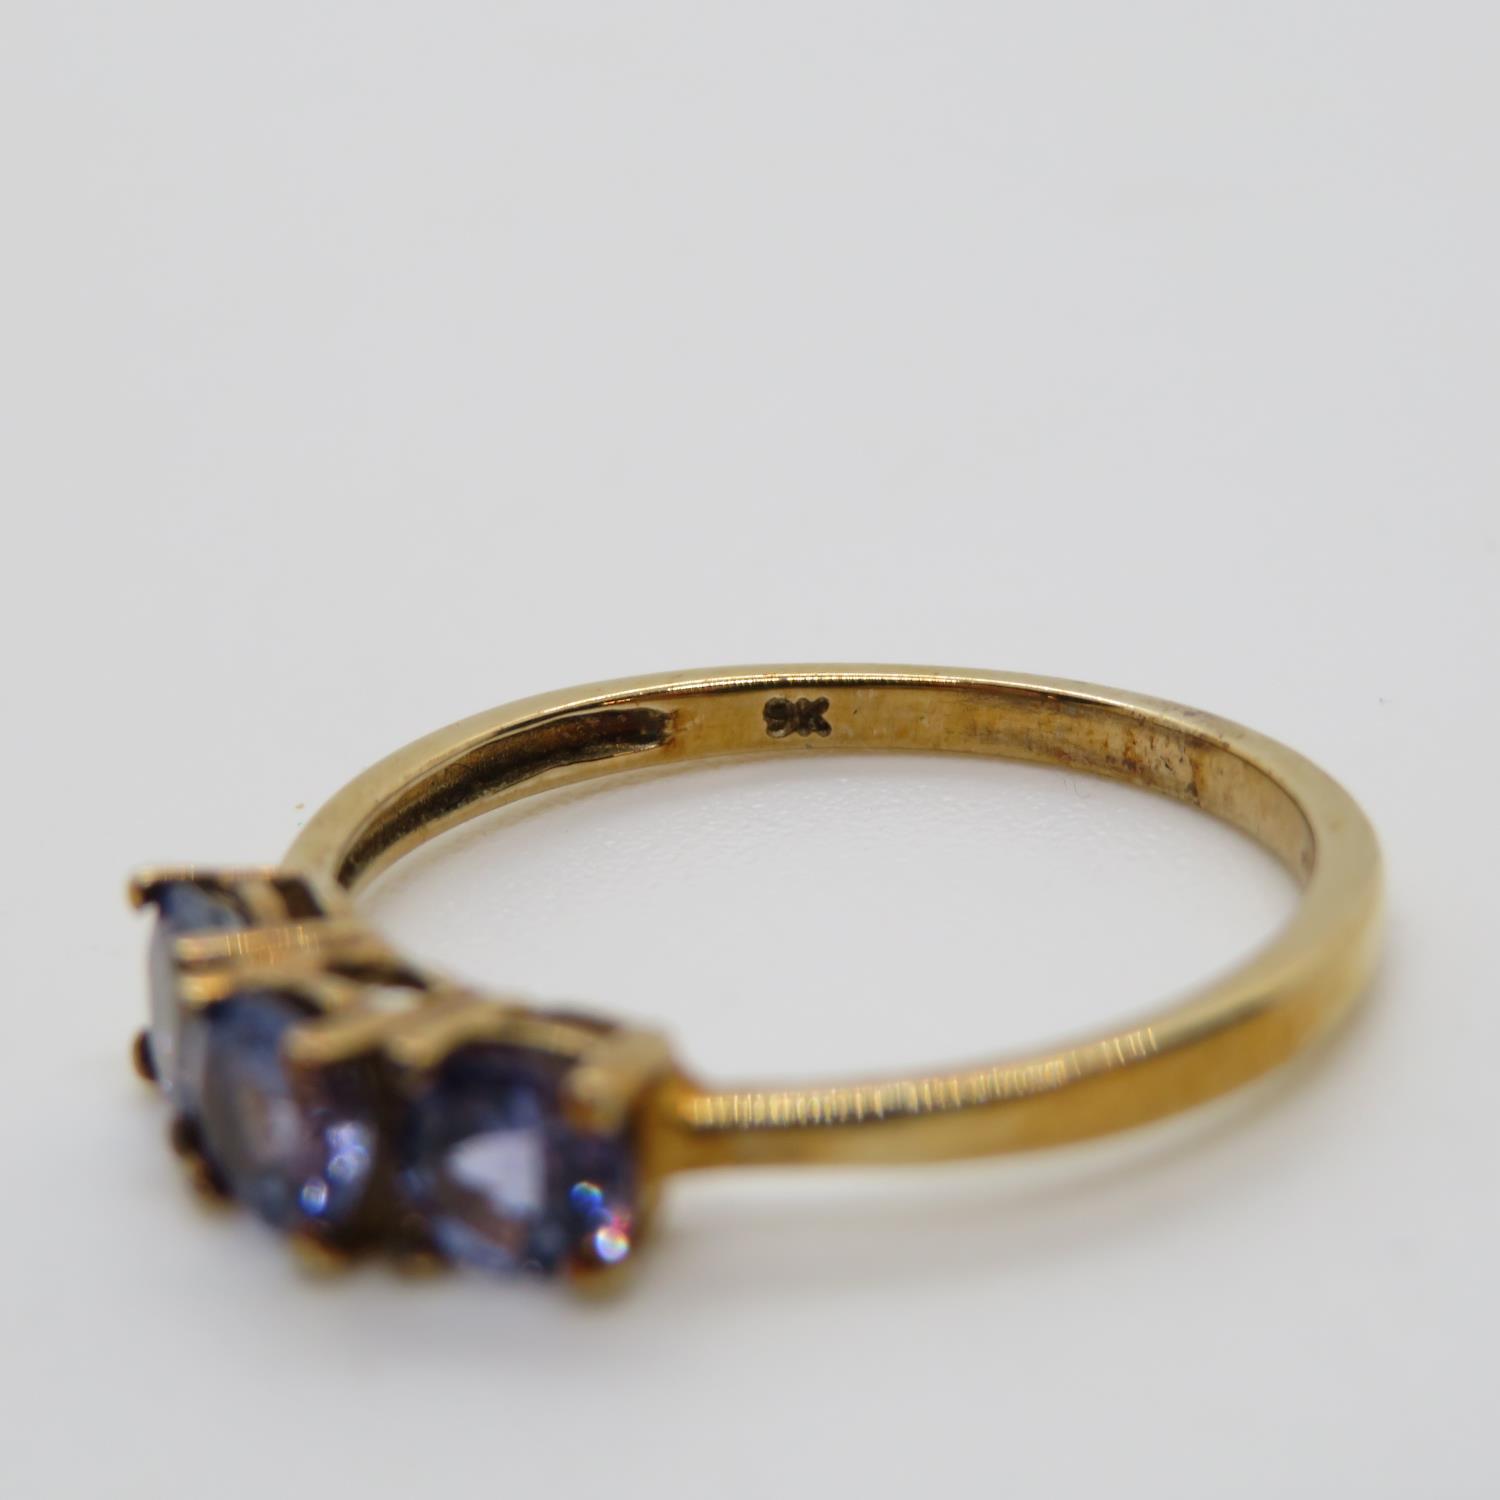 9ct gold ring 1.6g size O with possibly Tanzanite stones - Image 2 of 2